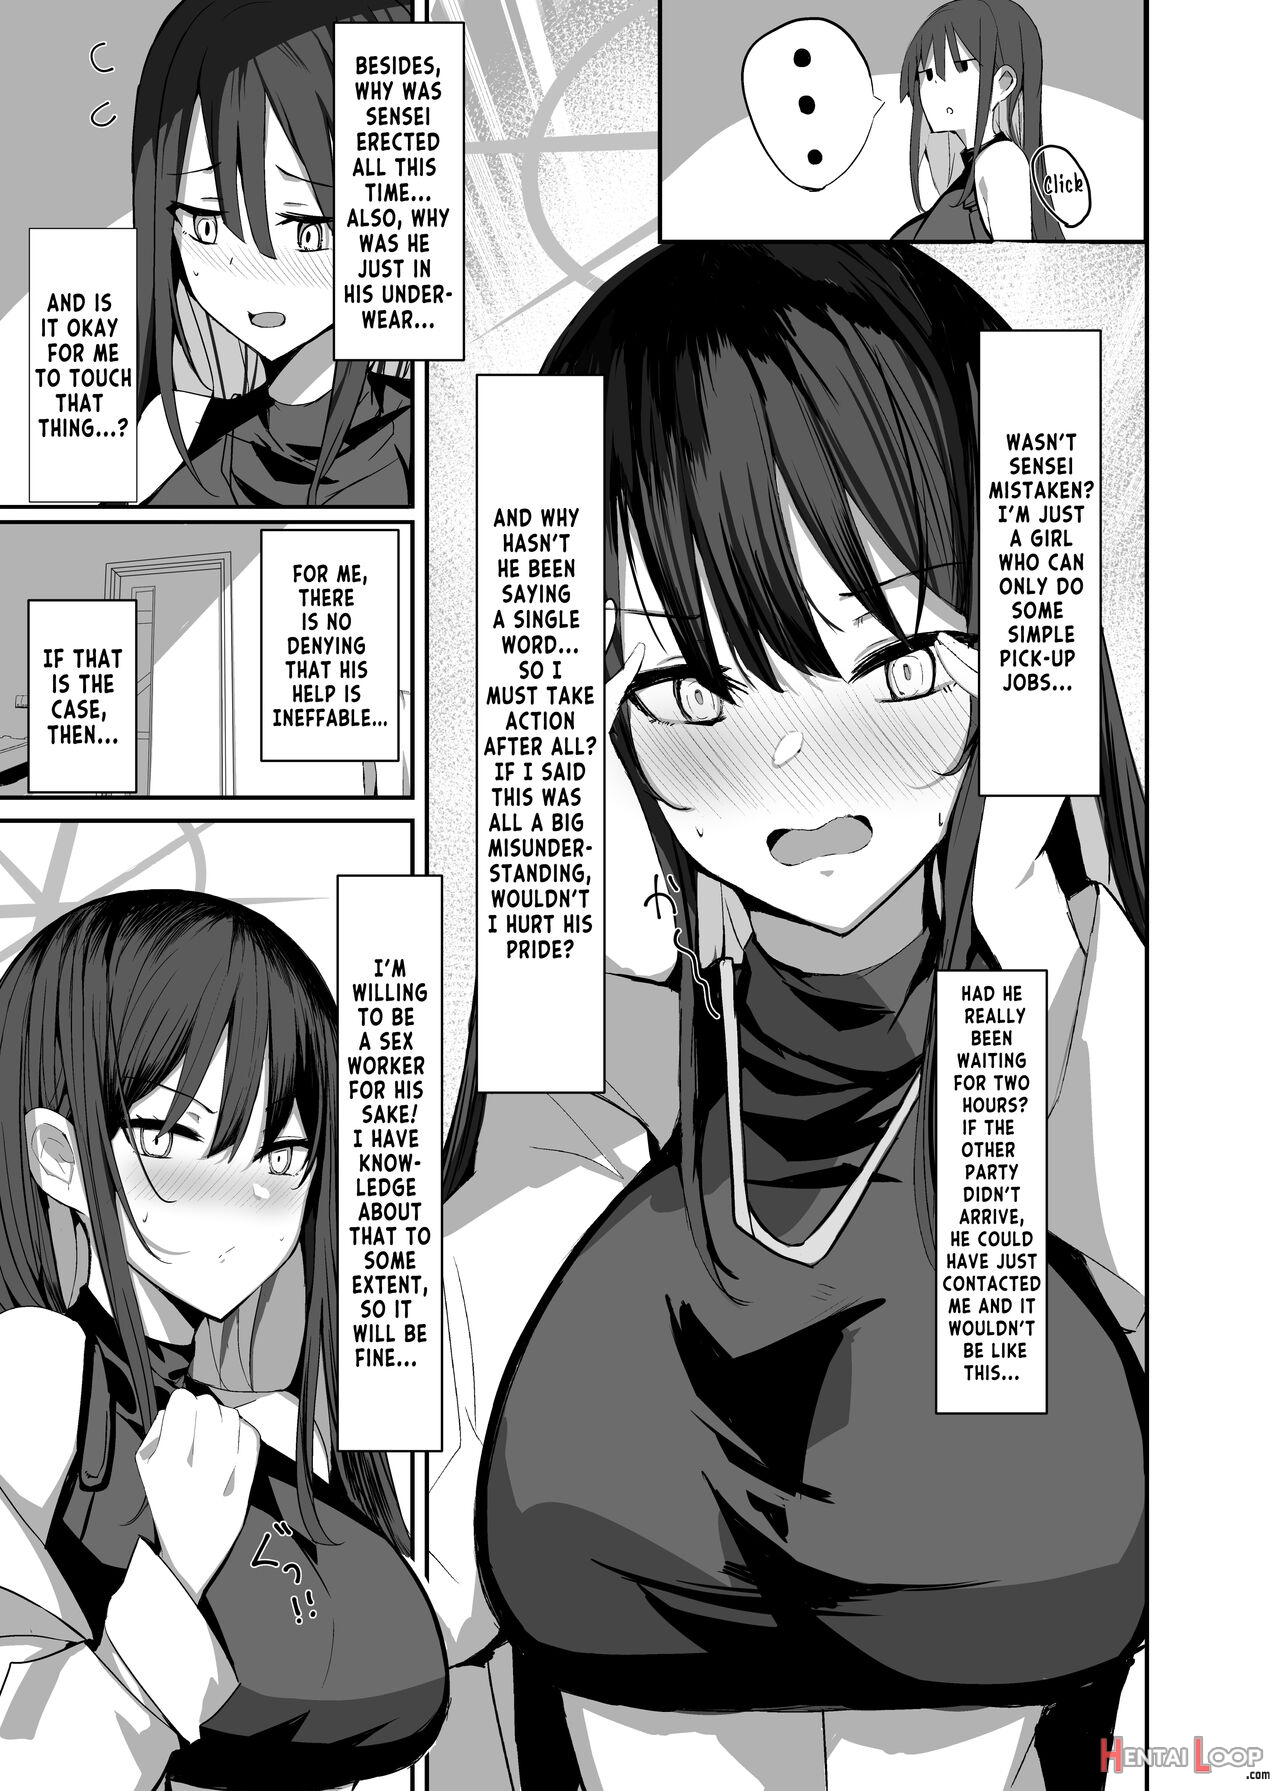 The Book Where I Hired A Sex Worker But Then Saori Showed Up And Just Like That We Had Sex page 9